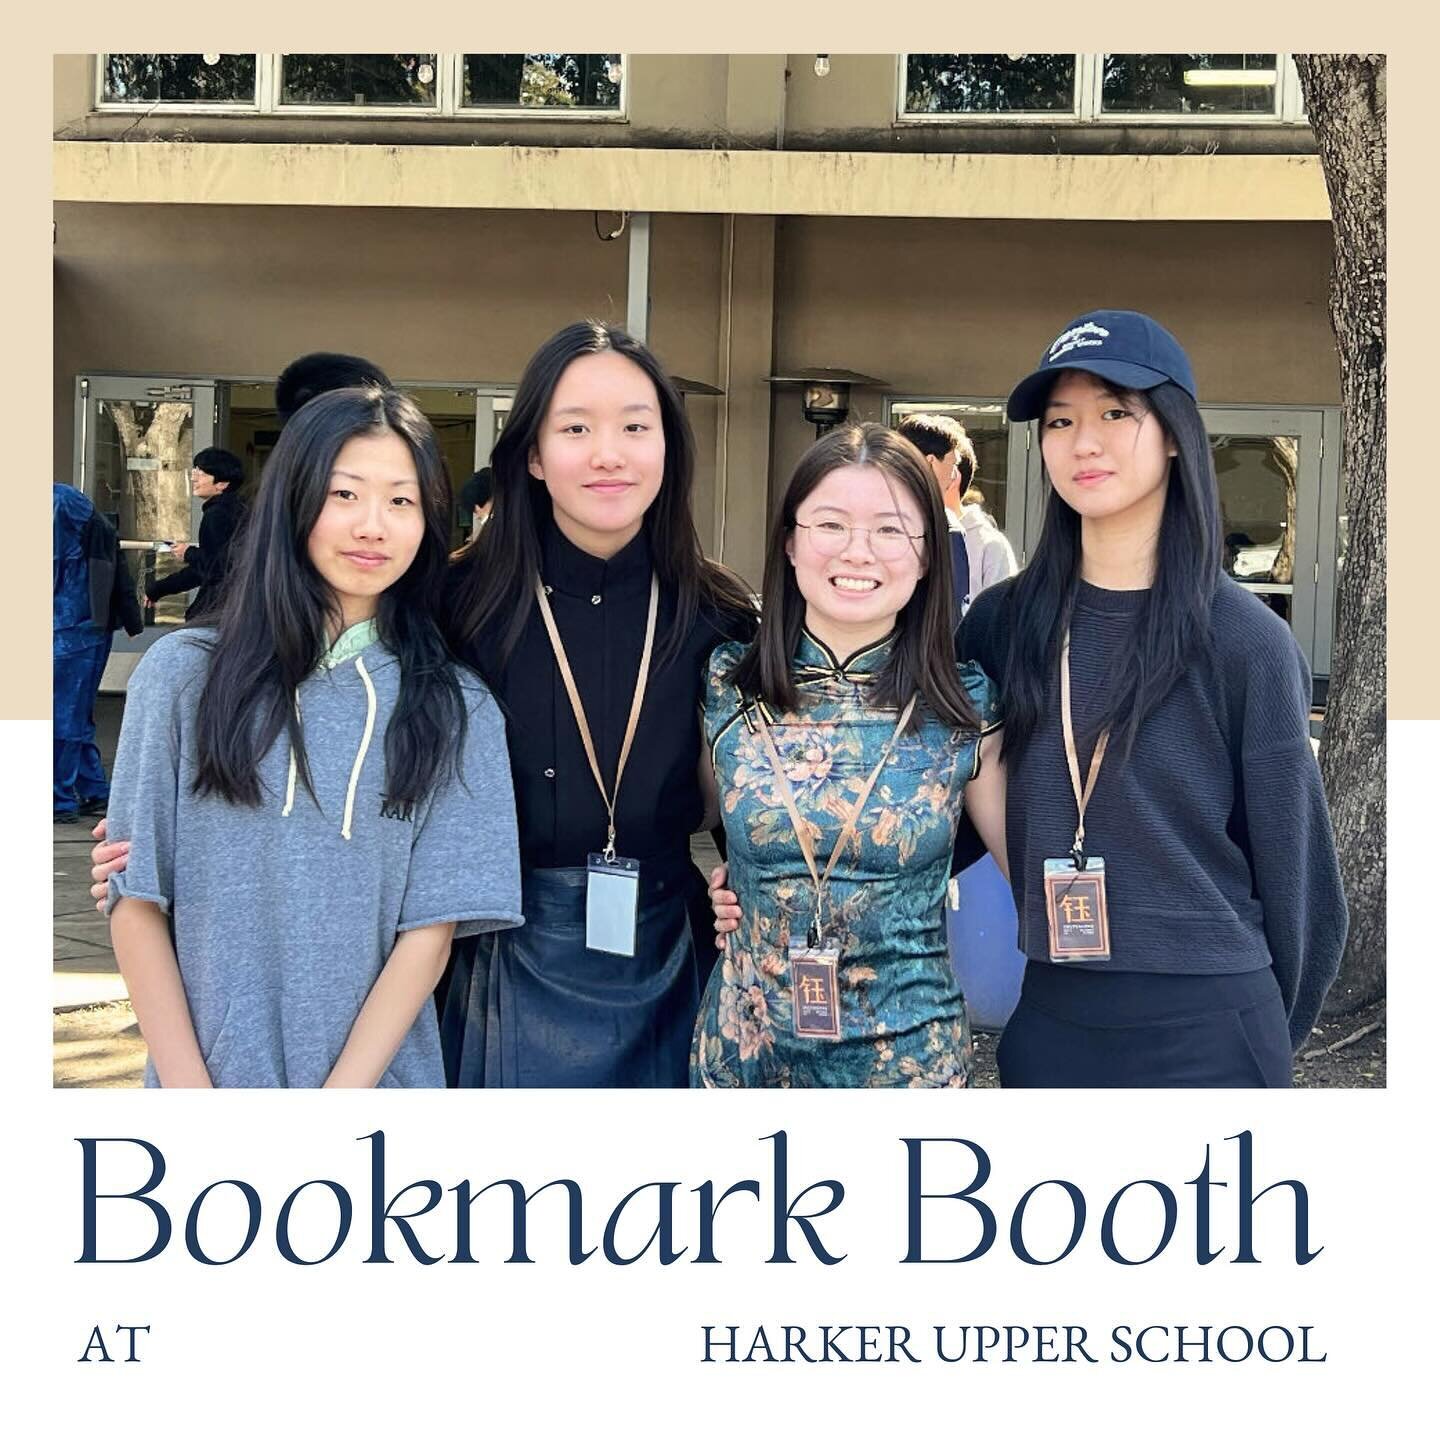 We had a fantastic time hosting a bookmark booth for the high school students at the Harker Upper School on February 22nd. We loved seeing all the beautiful bookmarks made by our attendees! 💛 

To volunteer to host our booths, apply at culturator.or